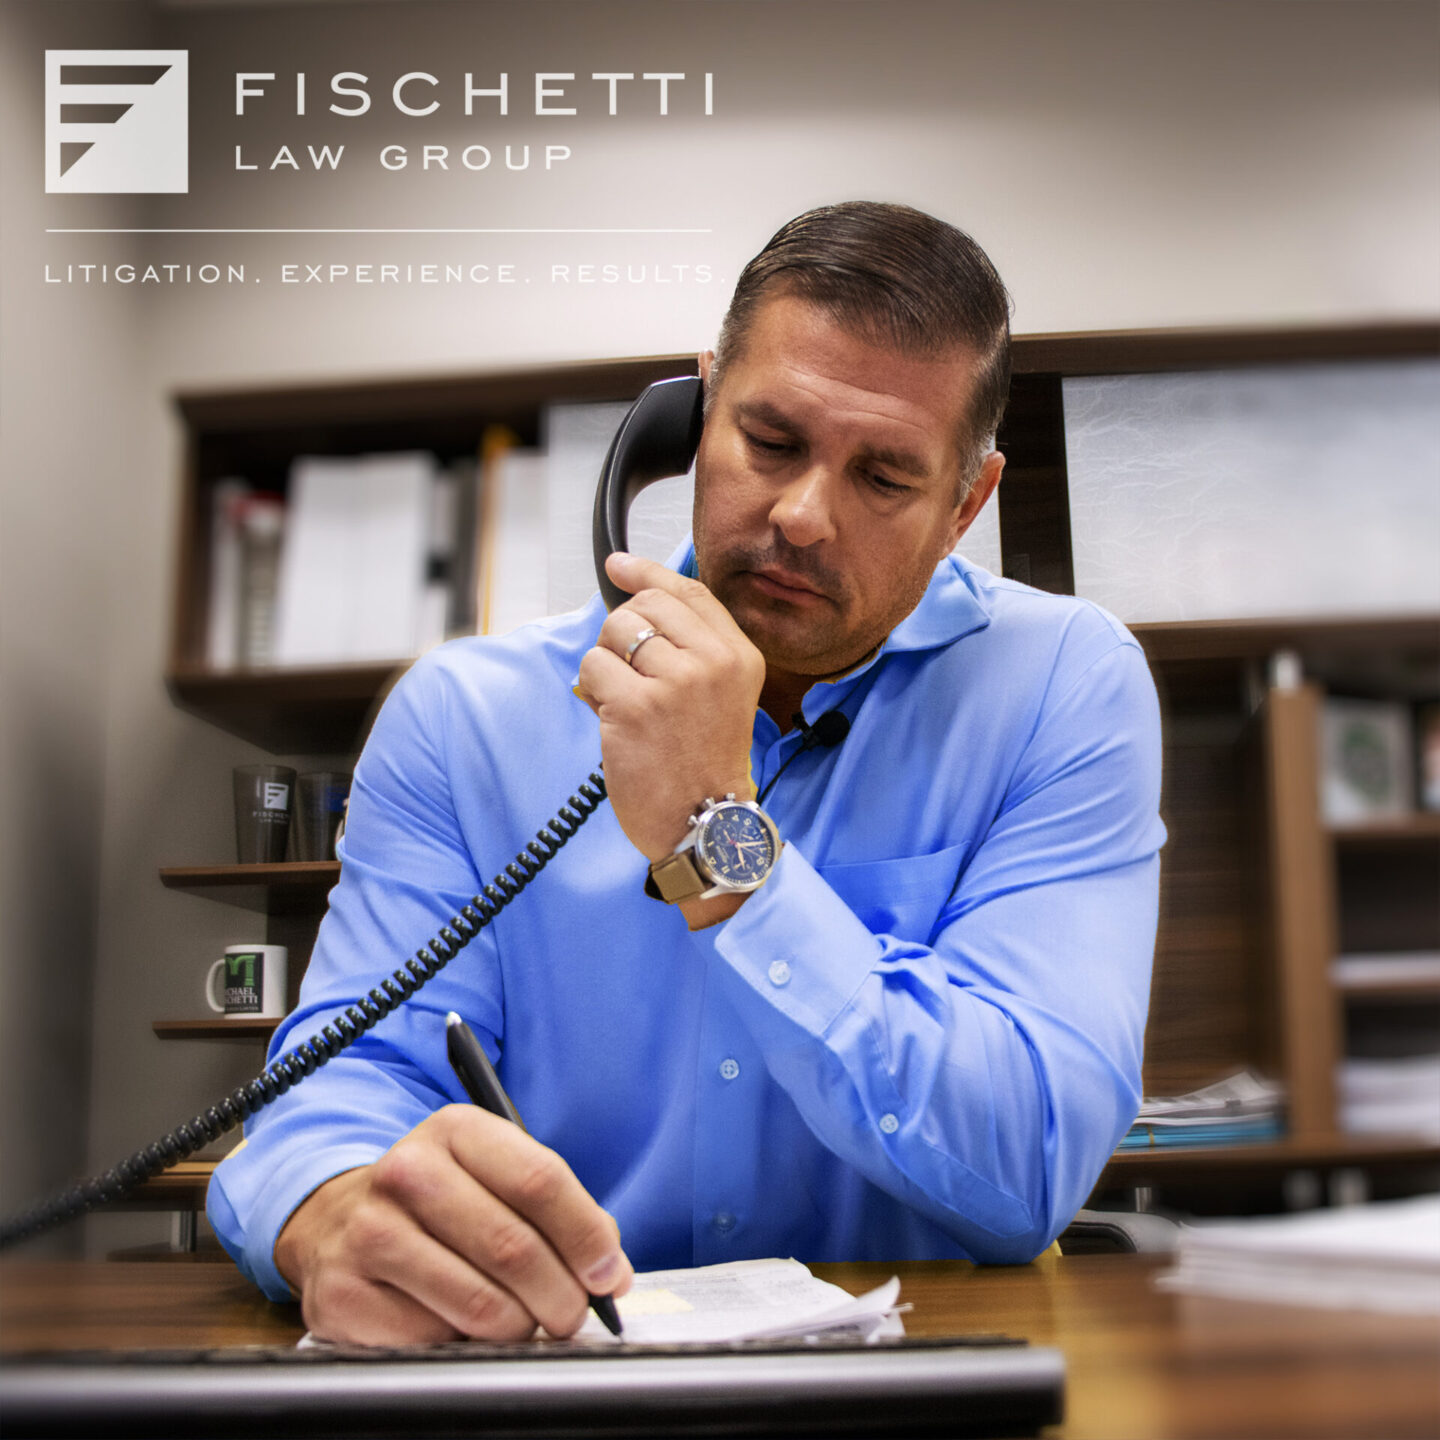 PIP Collections Lawyer - Fischetti Law Group - pip collections palm beach gardens - best law office palm beach gardens florida